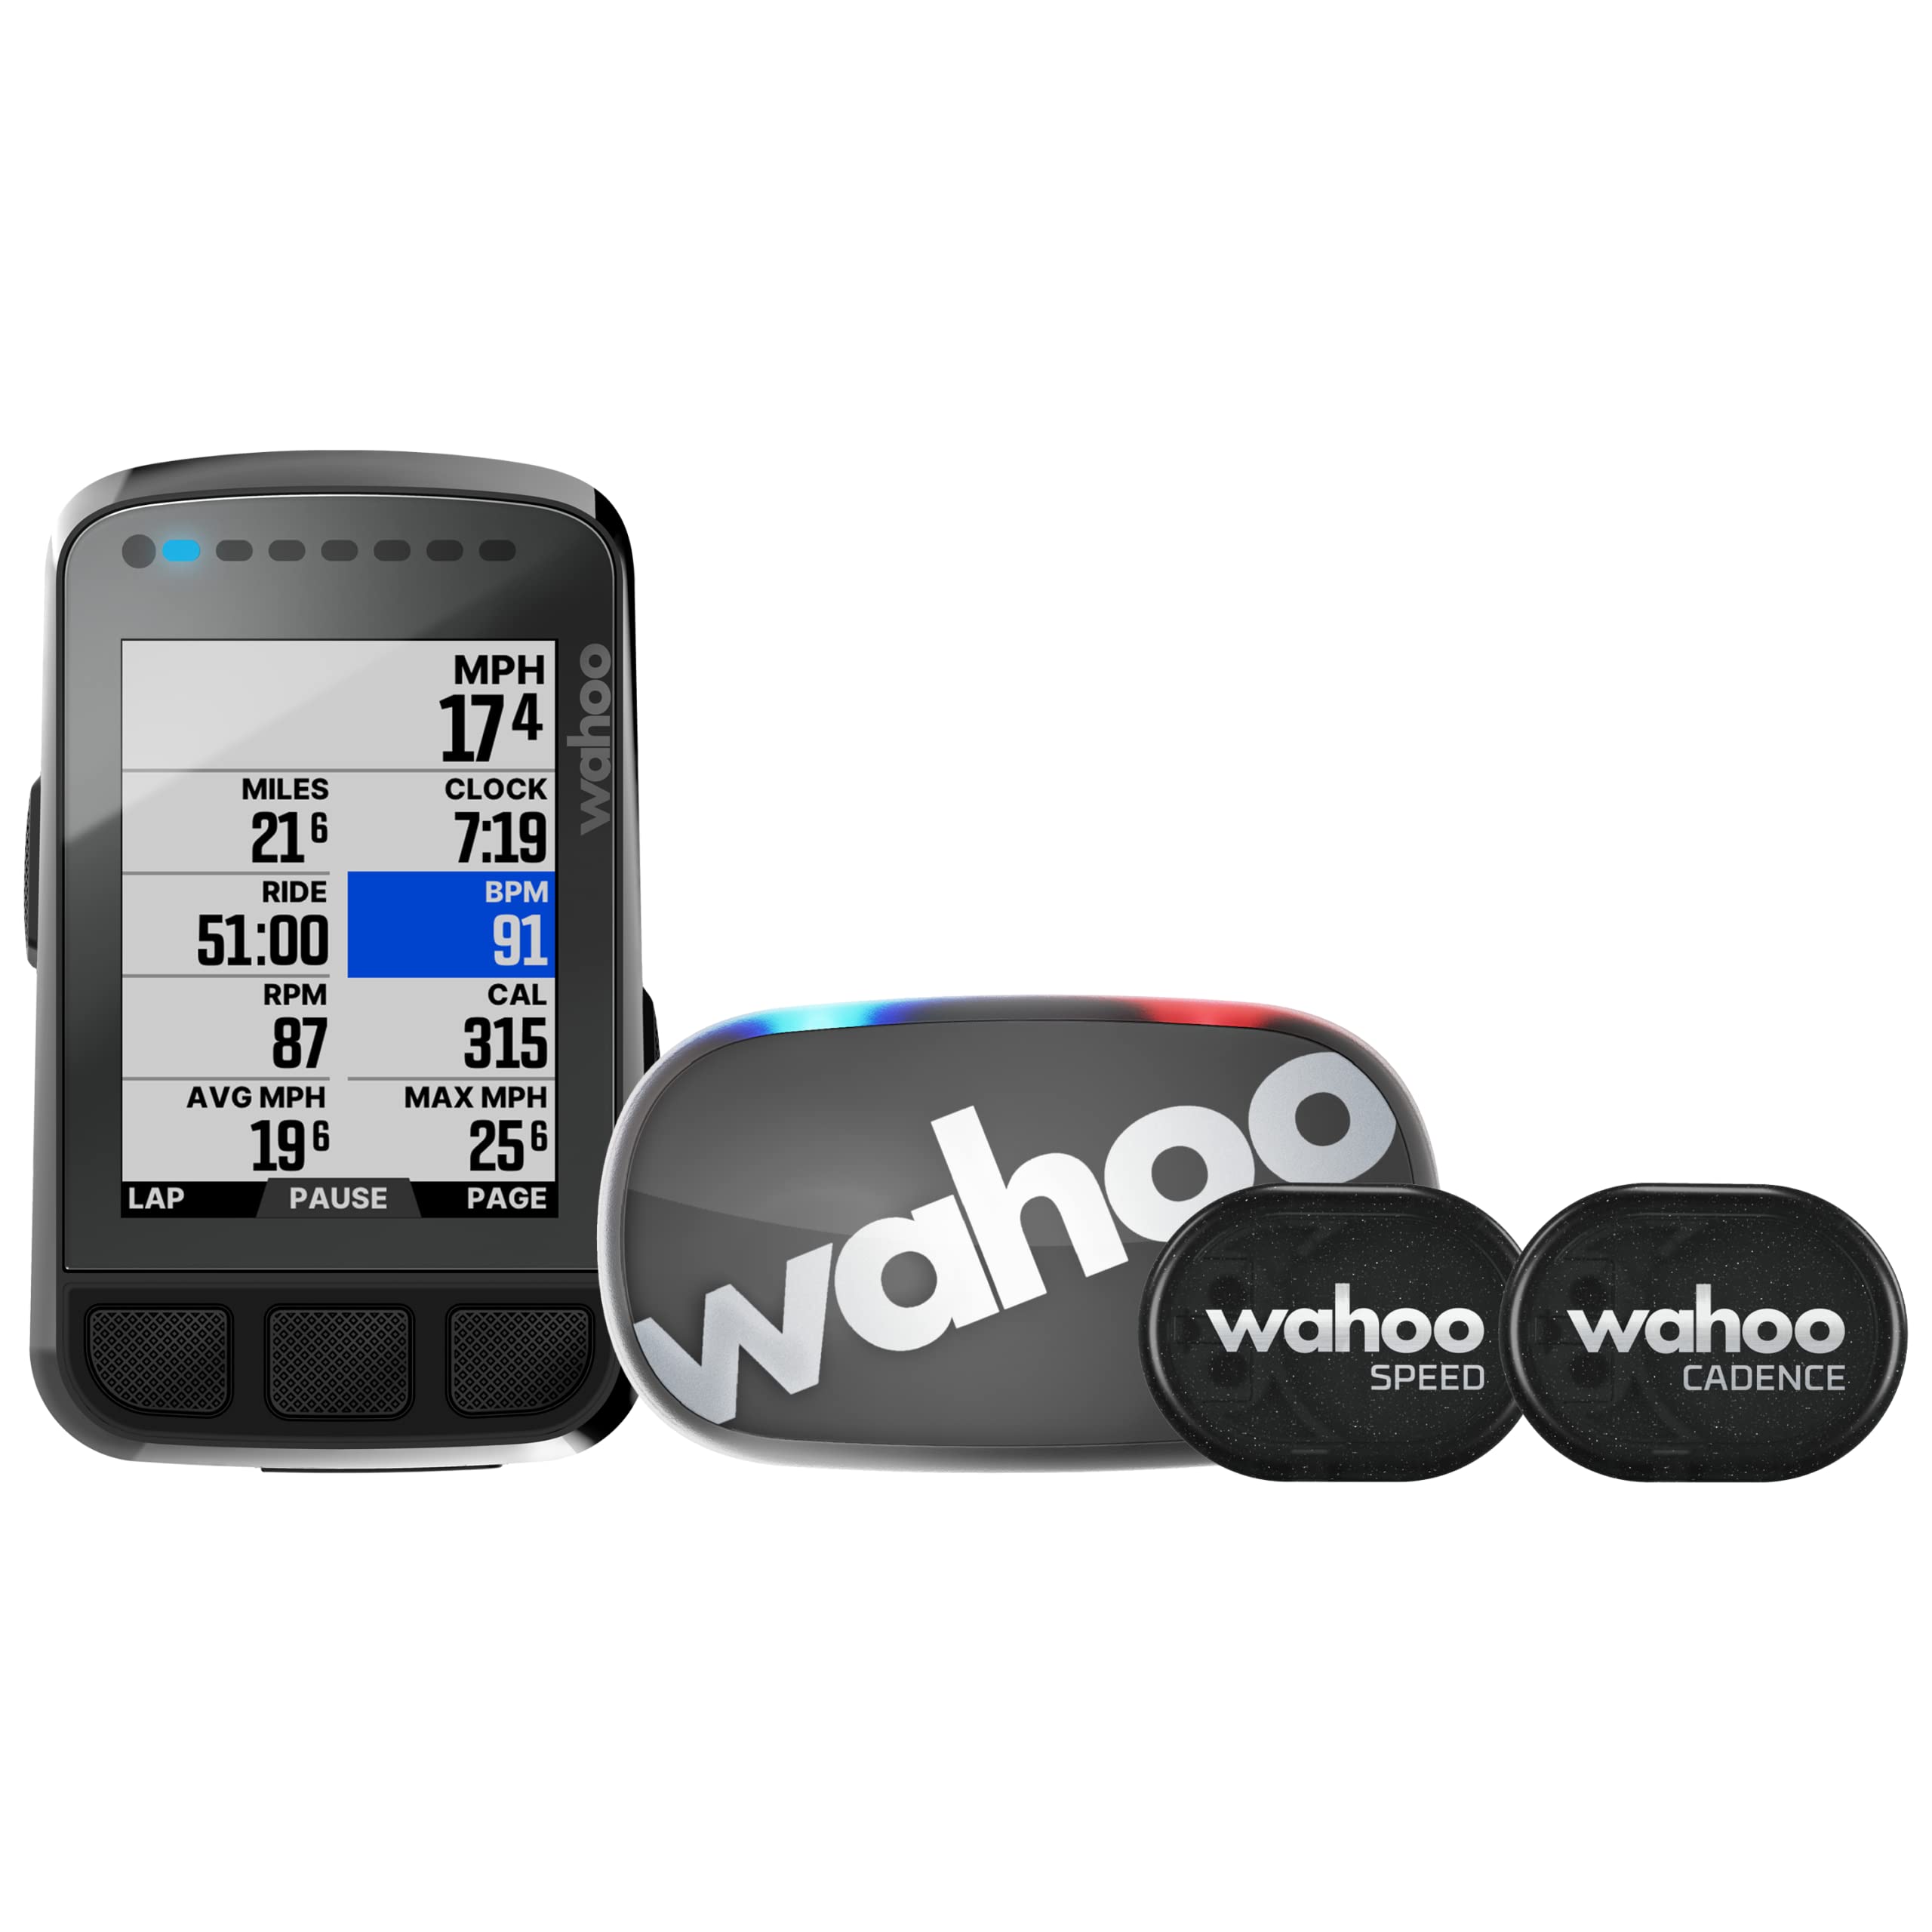 Wahoo ELEMNT Bolt V2 GPS Cycling/Bike Computer Bundle & Garmin 010-02376-00 Varia RTL515, Cycling Rearview Radar with Tail Light, Visual and Audible Alerts for Vehicles Up to 153 Yards Away